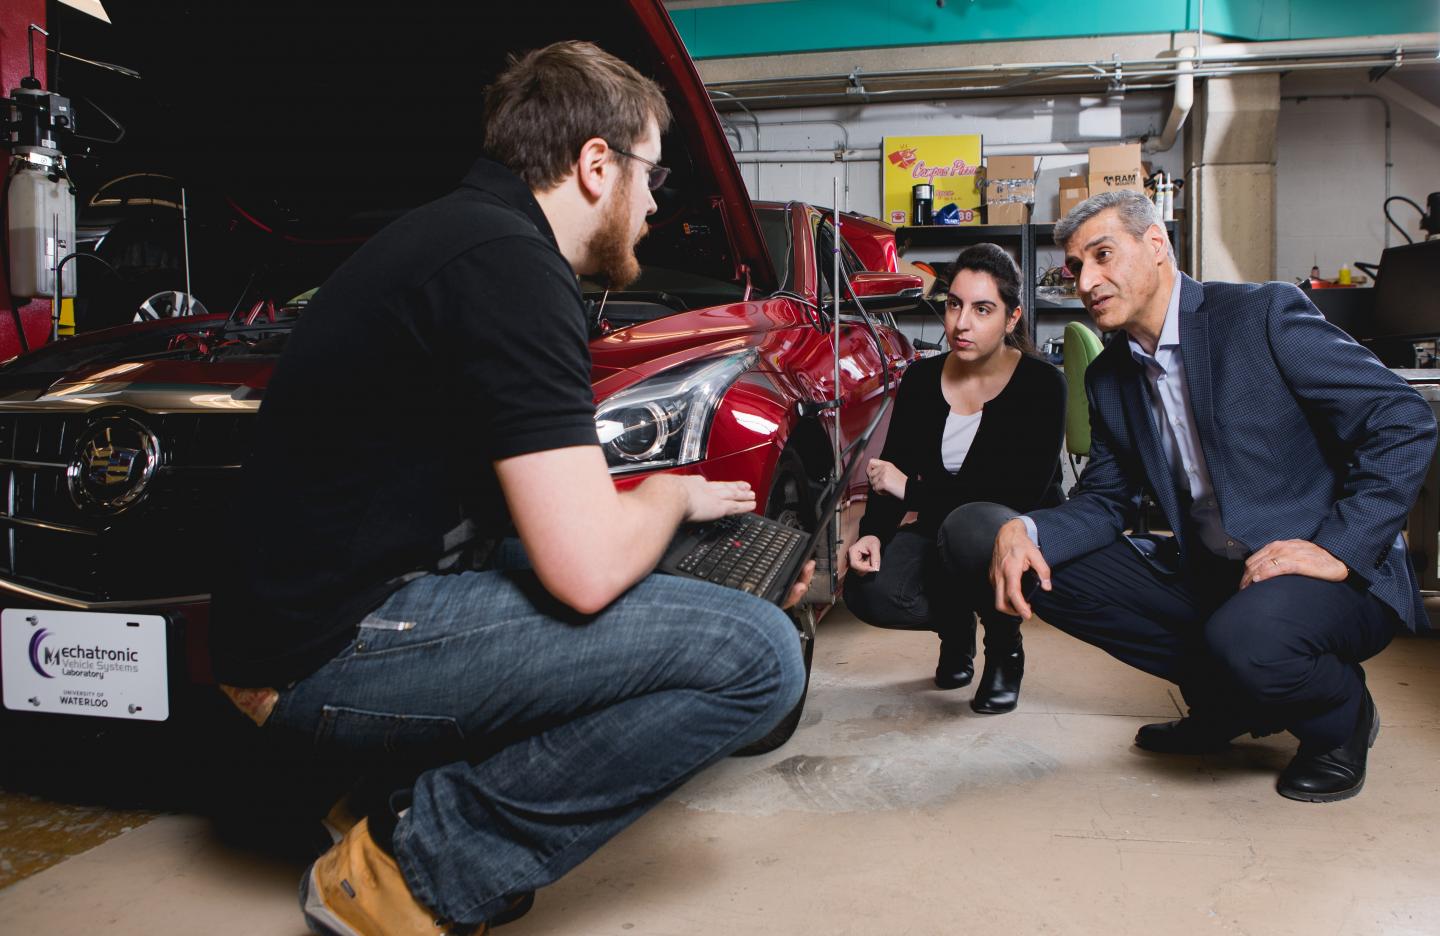 This is a photo of new valve technology that promises cheaper, greener engines, Amir Khajepour, a professor of mechanical and mechatronics engineering at Waterloo, in his lab working with his students